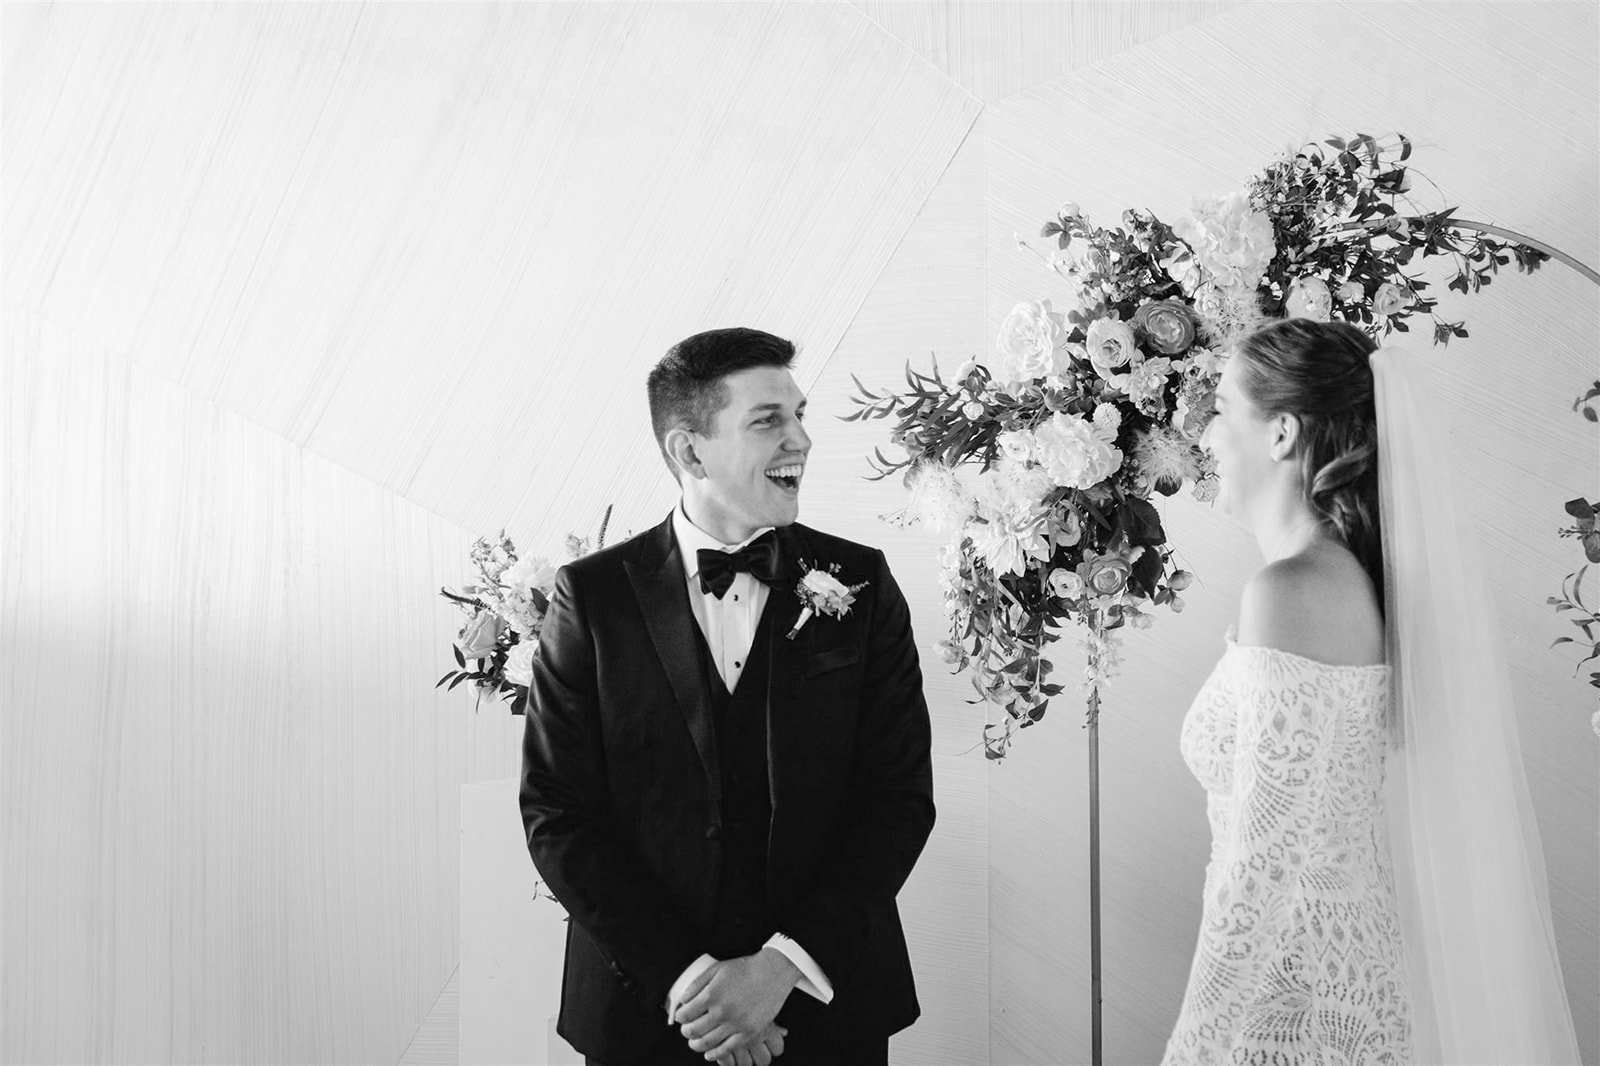 At Walden Chicago, the bride and groom share a breathtaking first look amidst vibrant peach, coral, and white blooms.